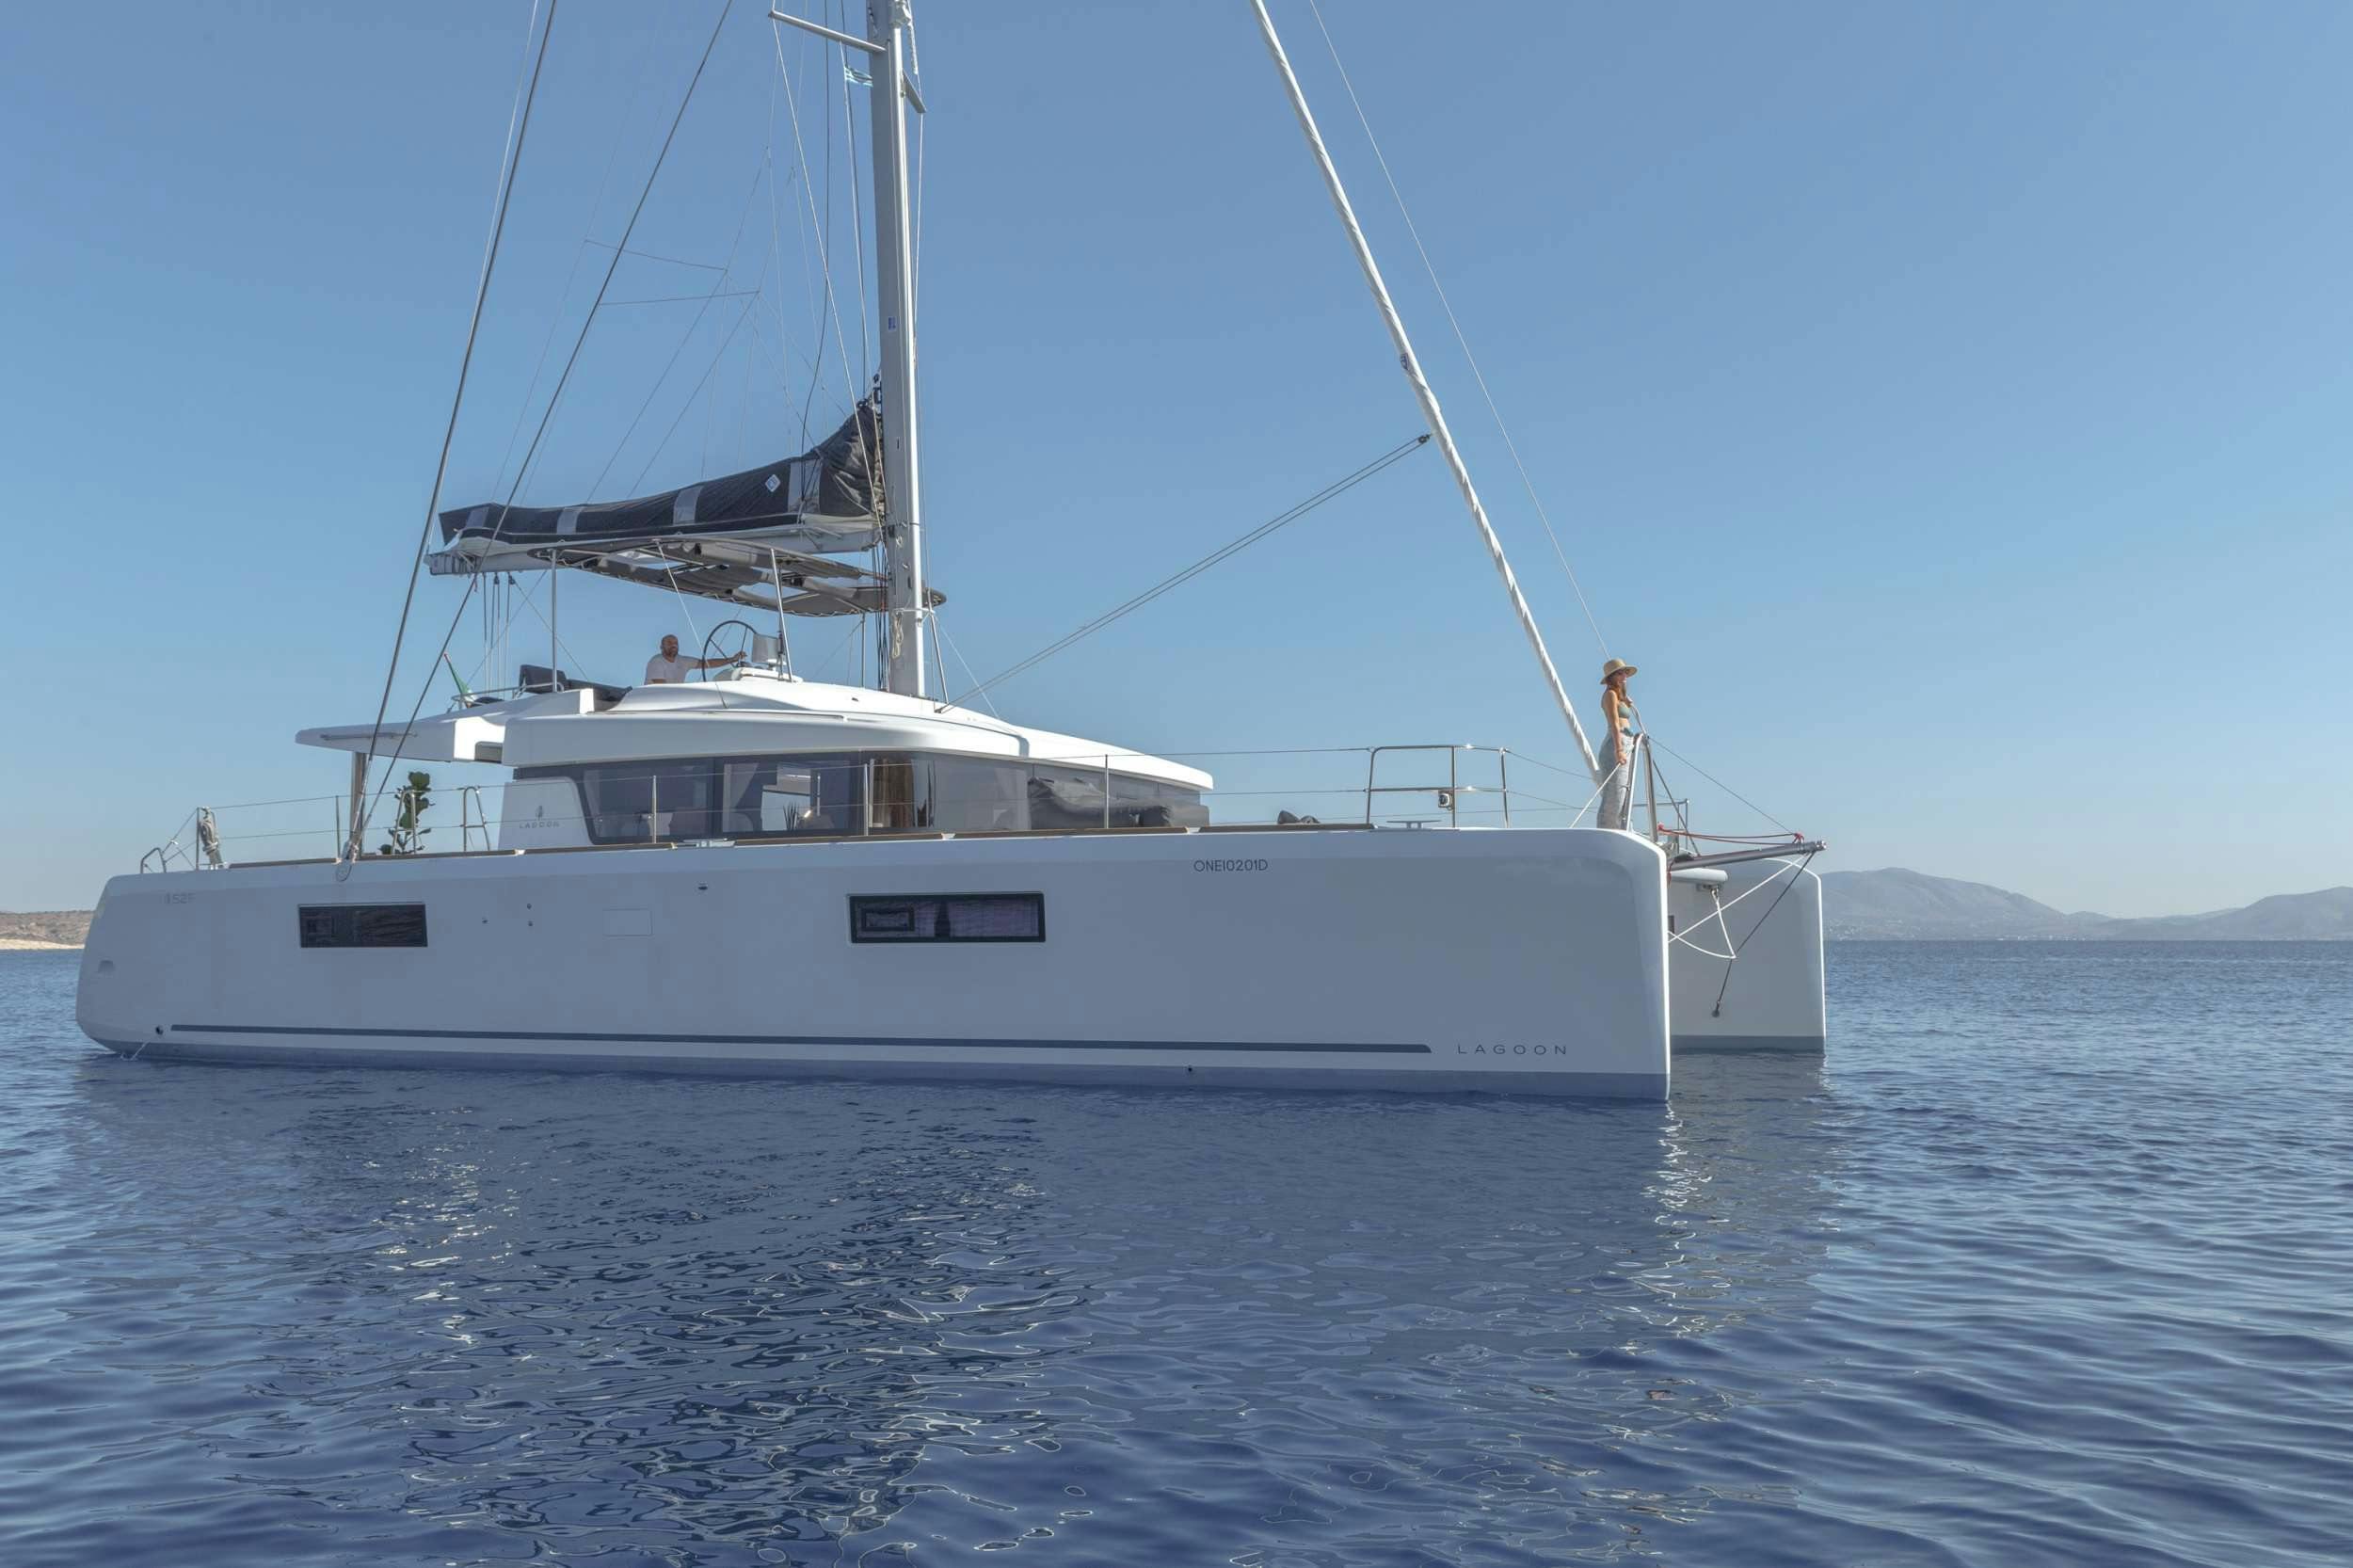 ONEIDA - Catamaran Charter Saint Vincent and the Grenadines & Boat hire in Greece 1